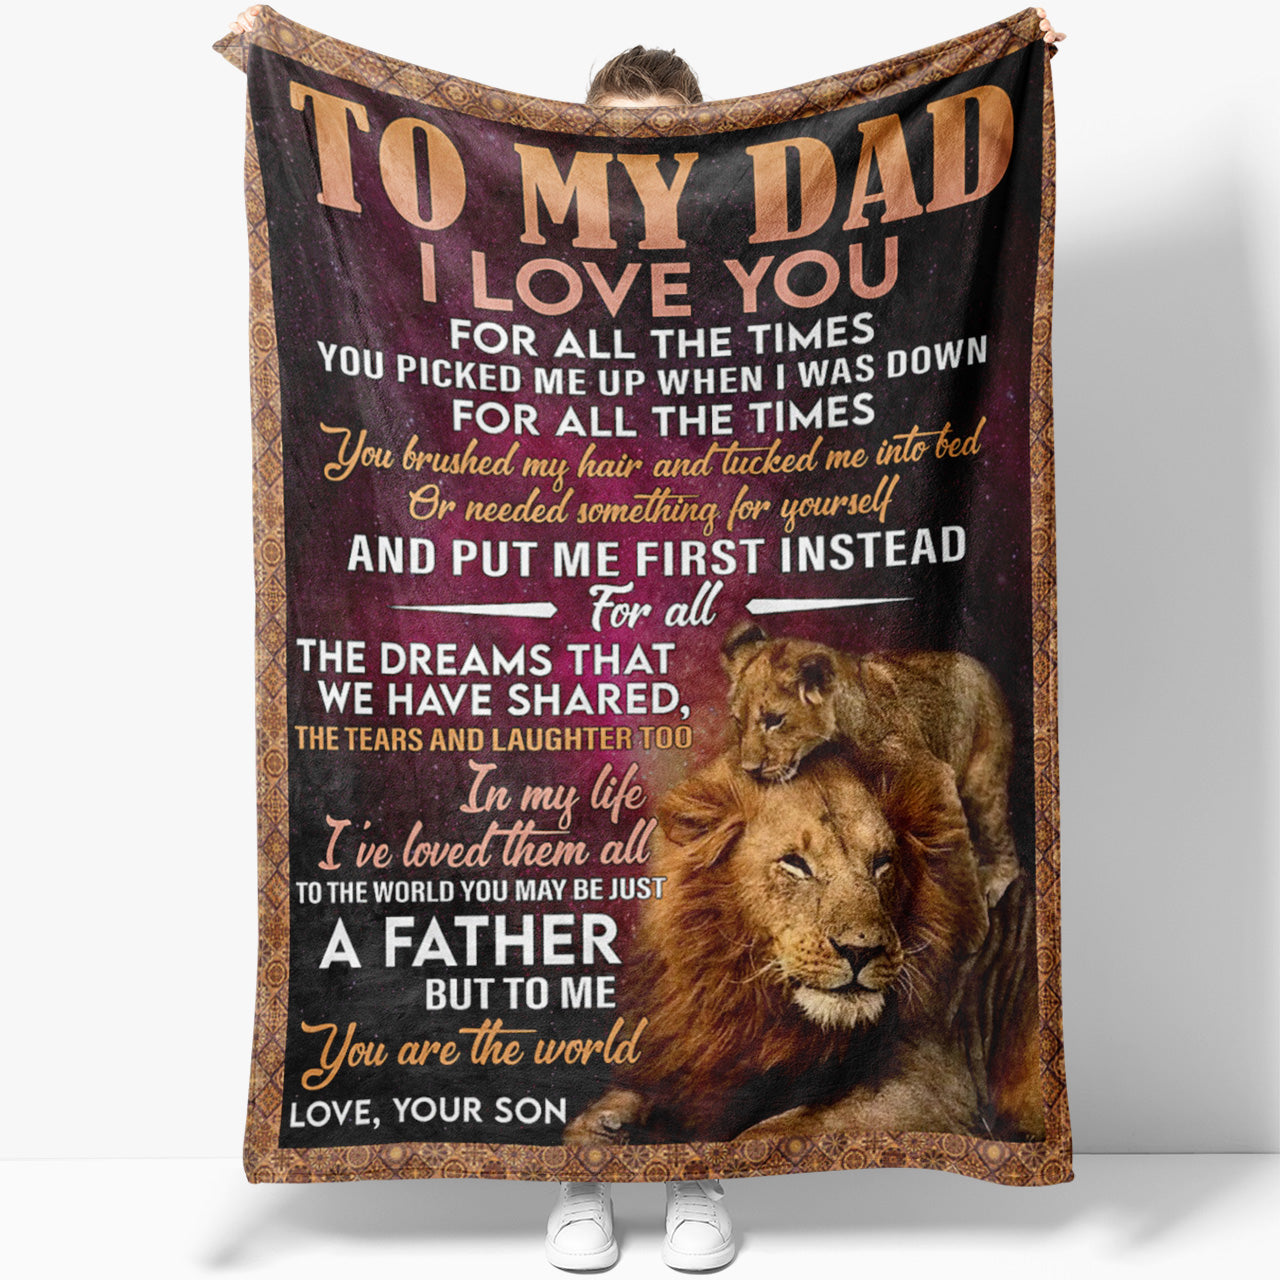 Blanket Gift ideas For Dad, Christmas Gifts For Dad